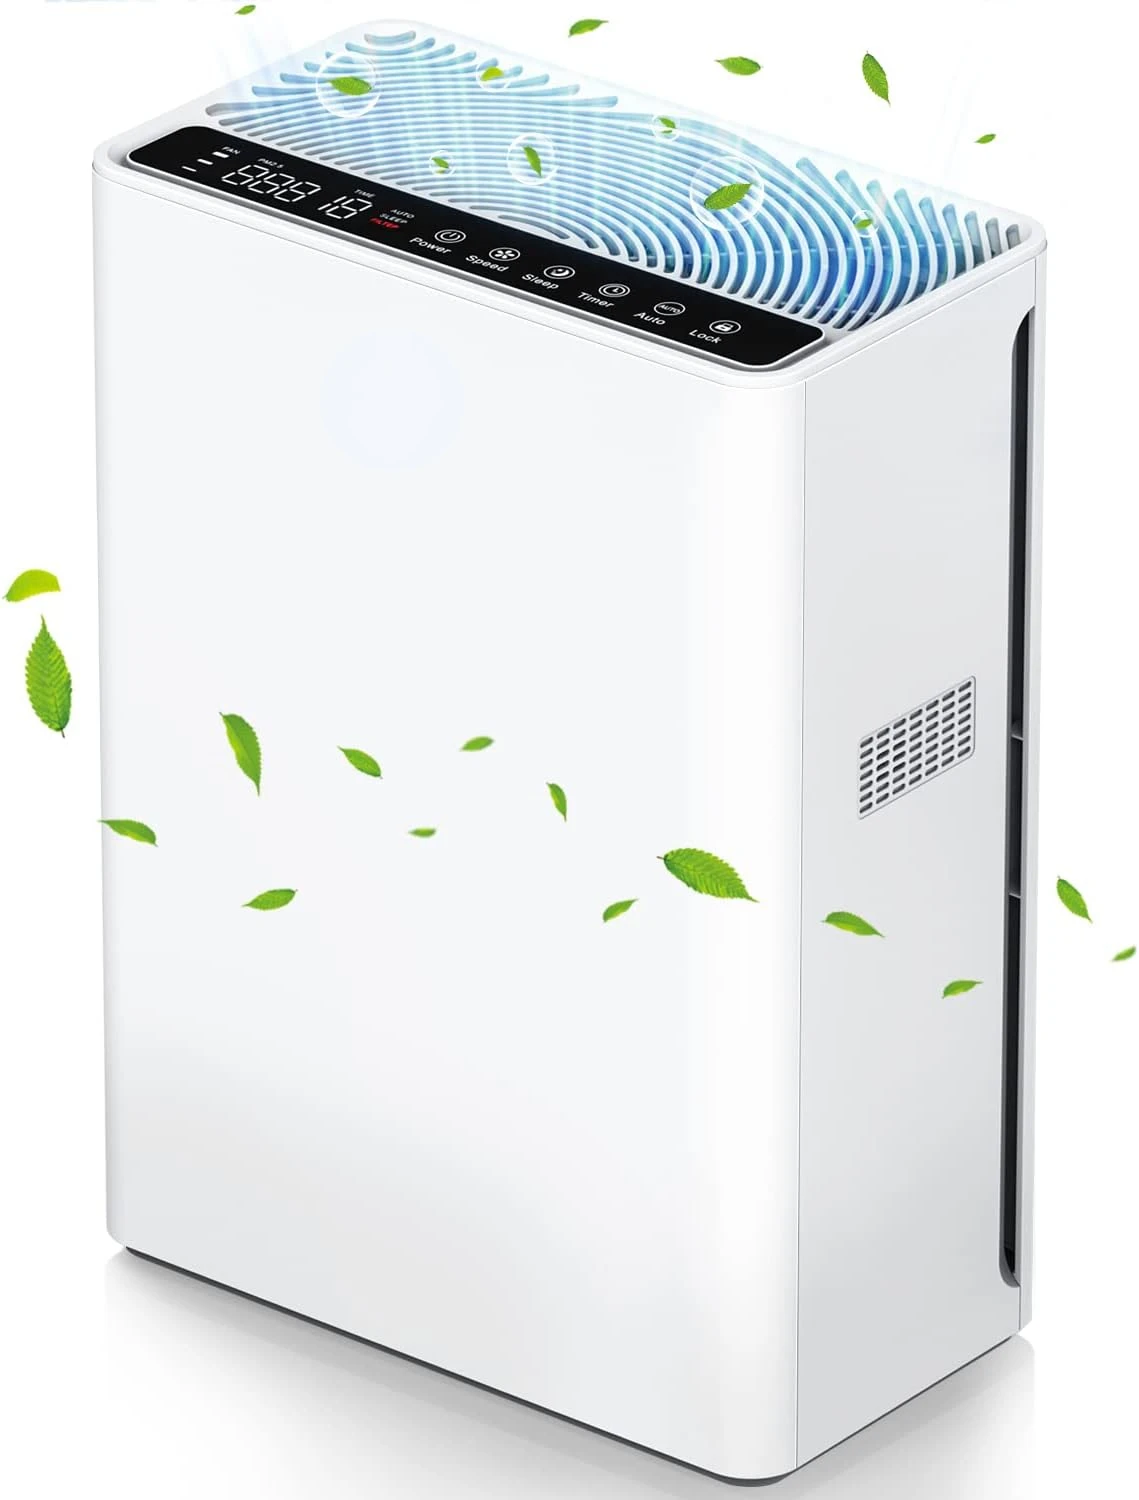 

Air Purifiers For Home Large Room Up To 1730 sqft H13 HEPA Air Purifiers Filter With Filter Reminder Timer Sleep Air Quality Dis